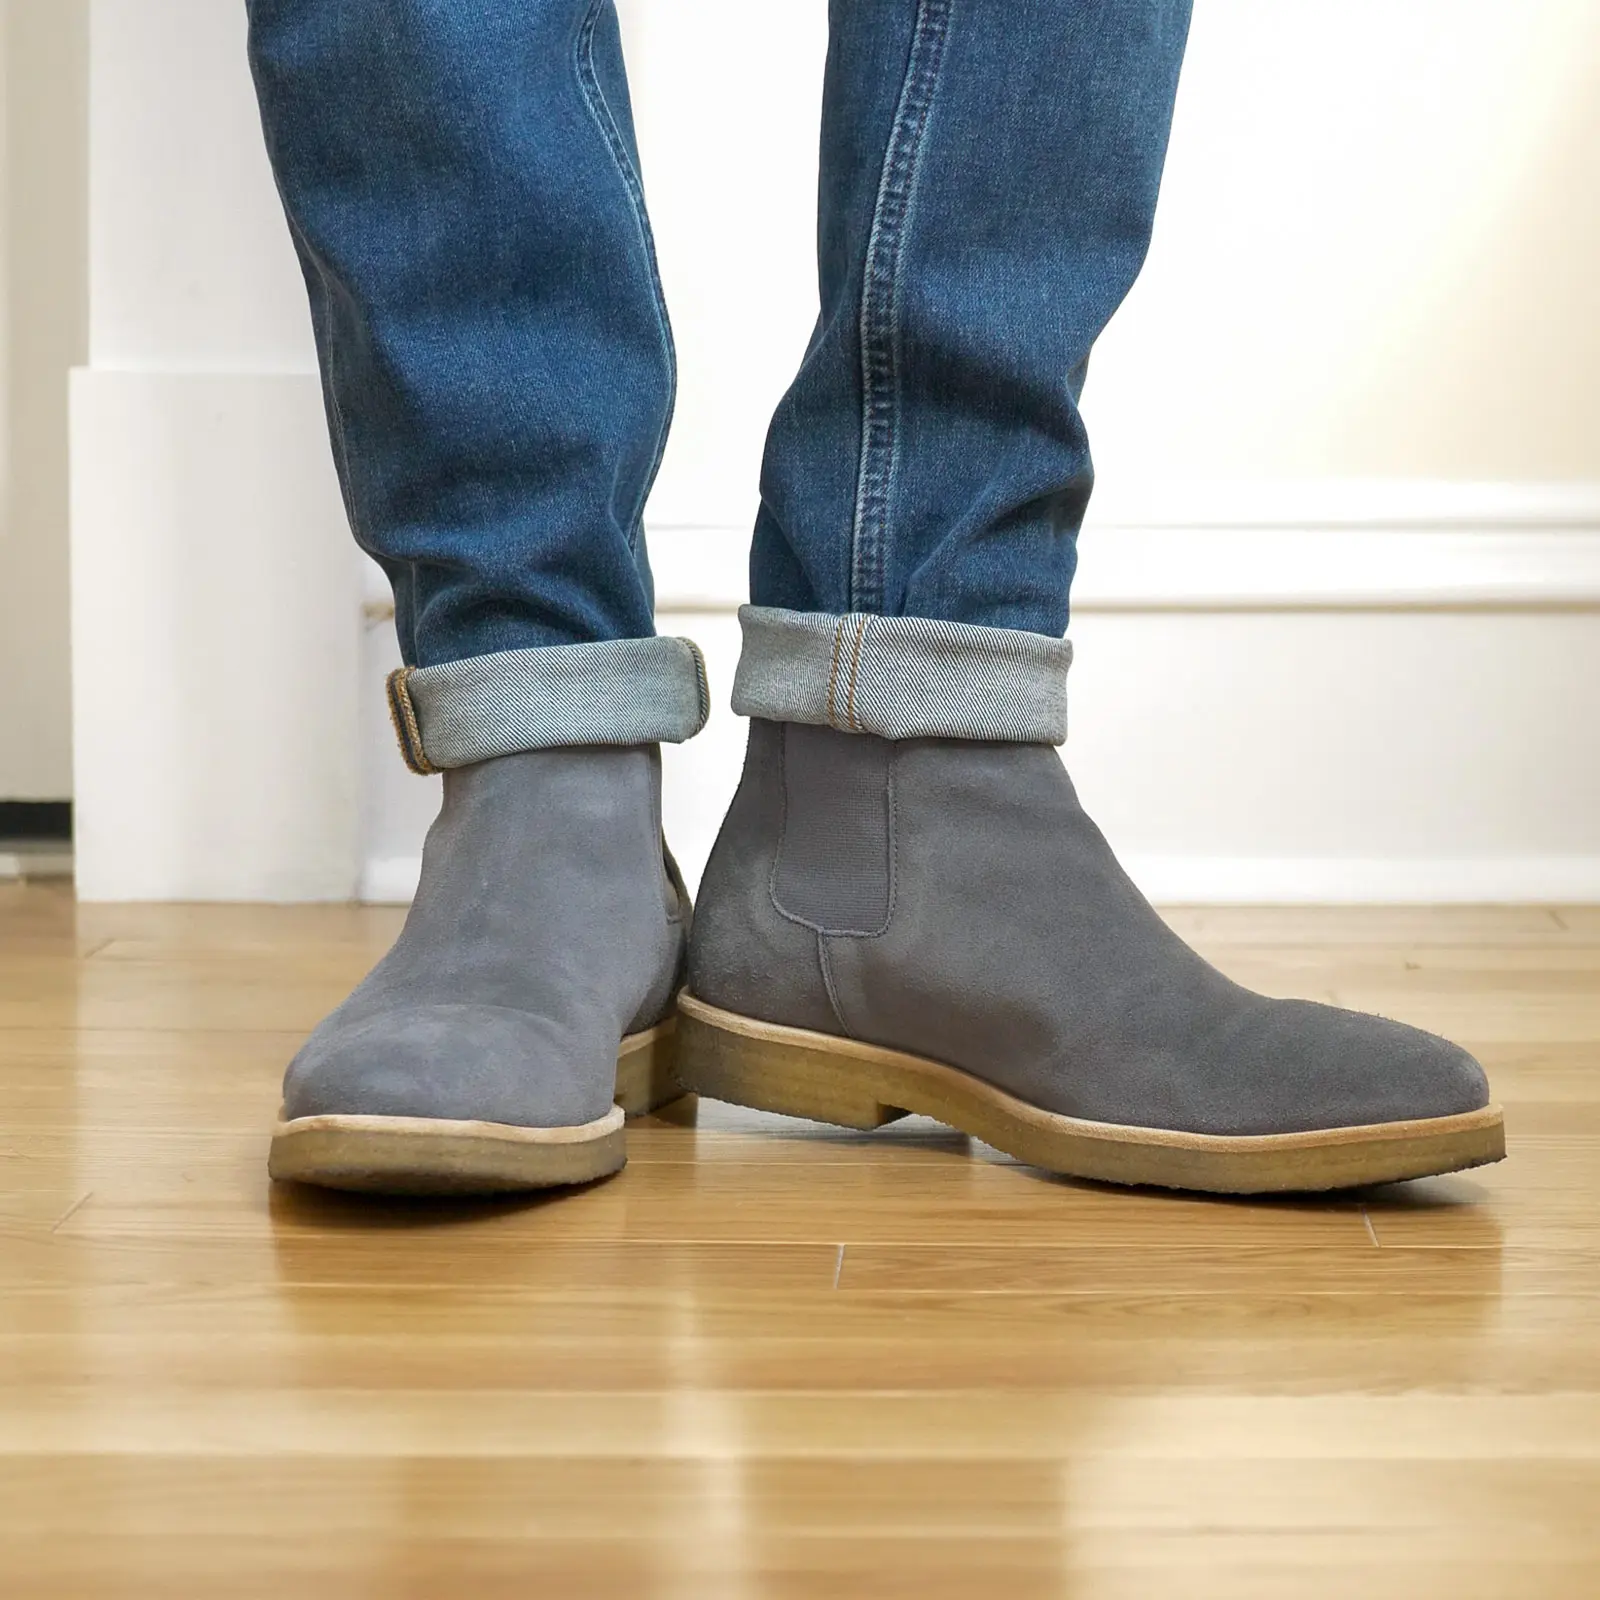 Oliver Cabell Chelsea Boots Review: Are They the Real Deal?